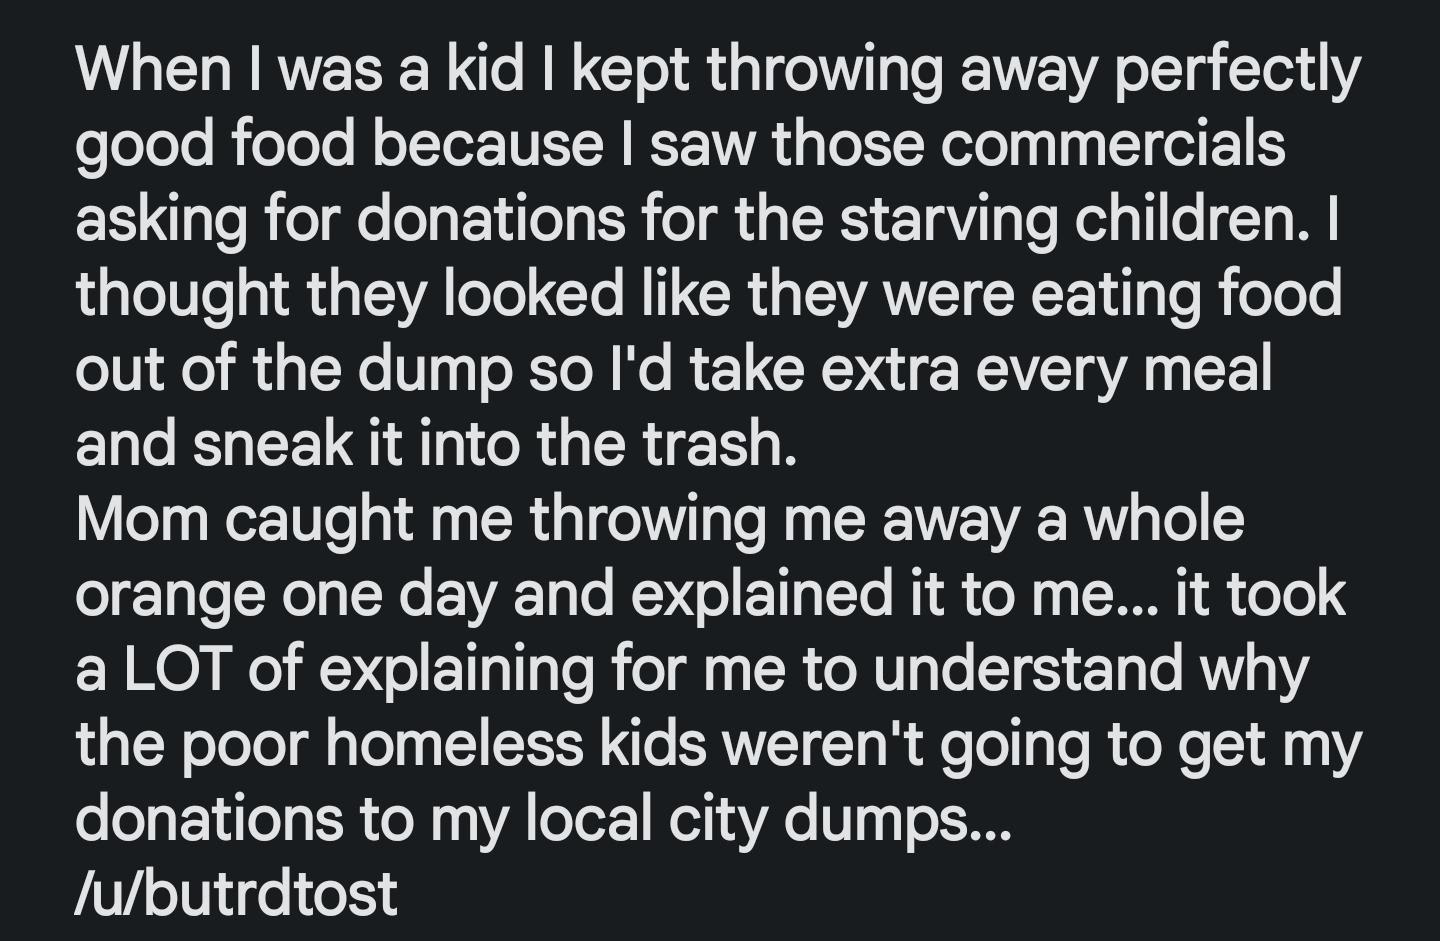 "Helping the homeless kids"... for several months